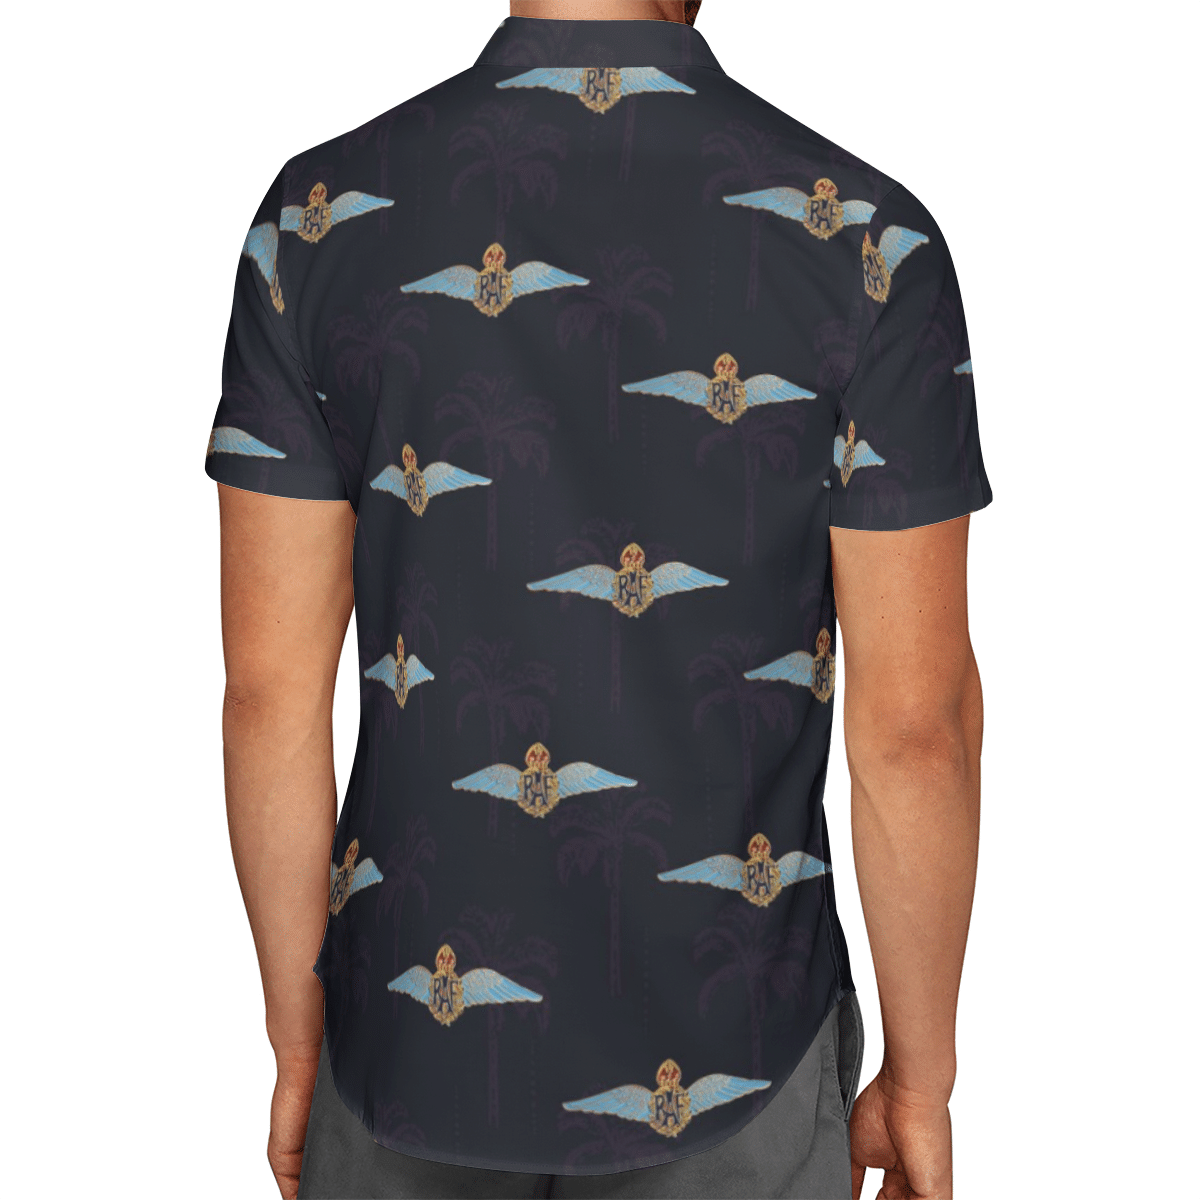 Going to the beach with a quality shirt 158